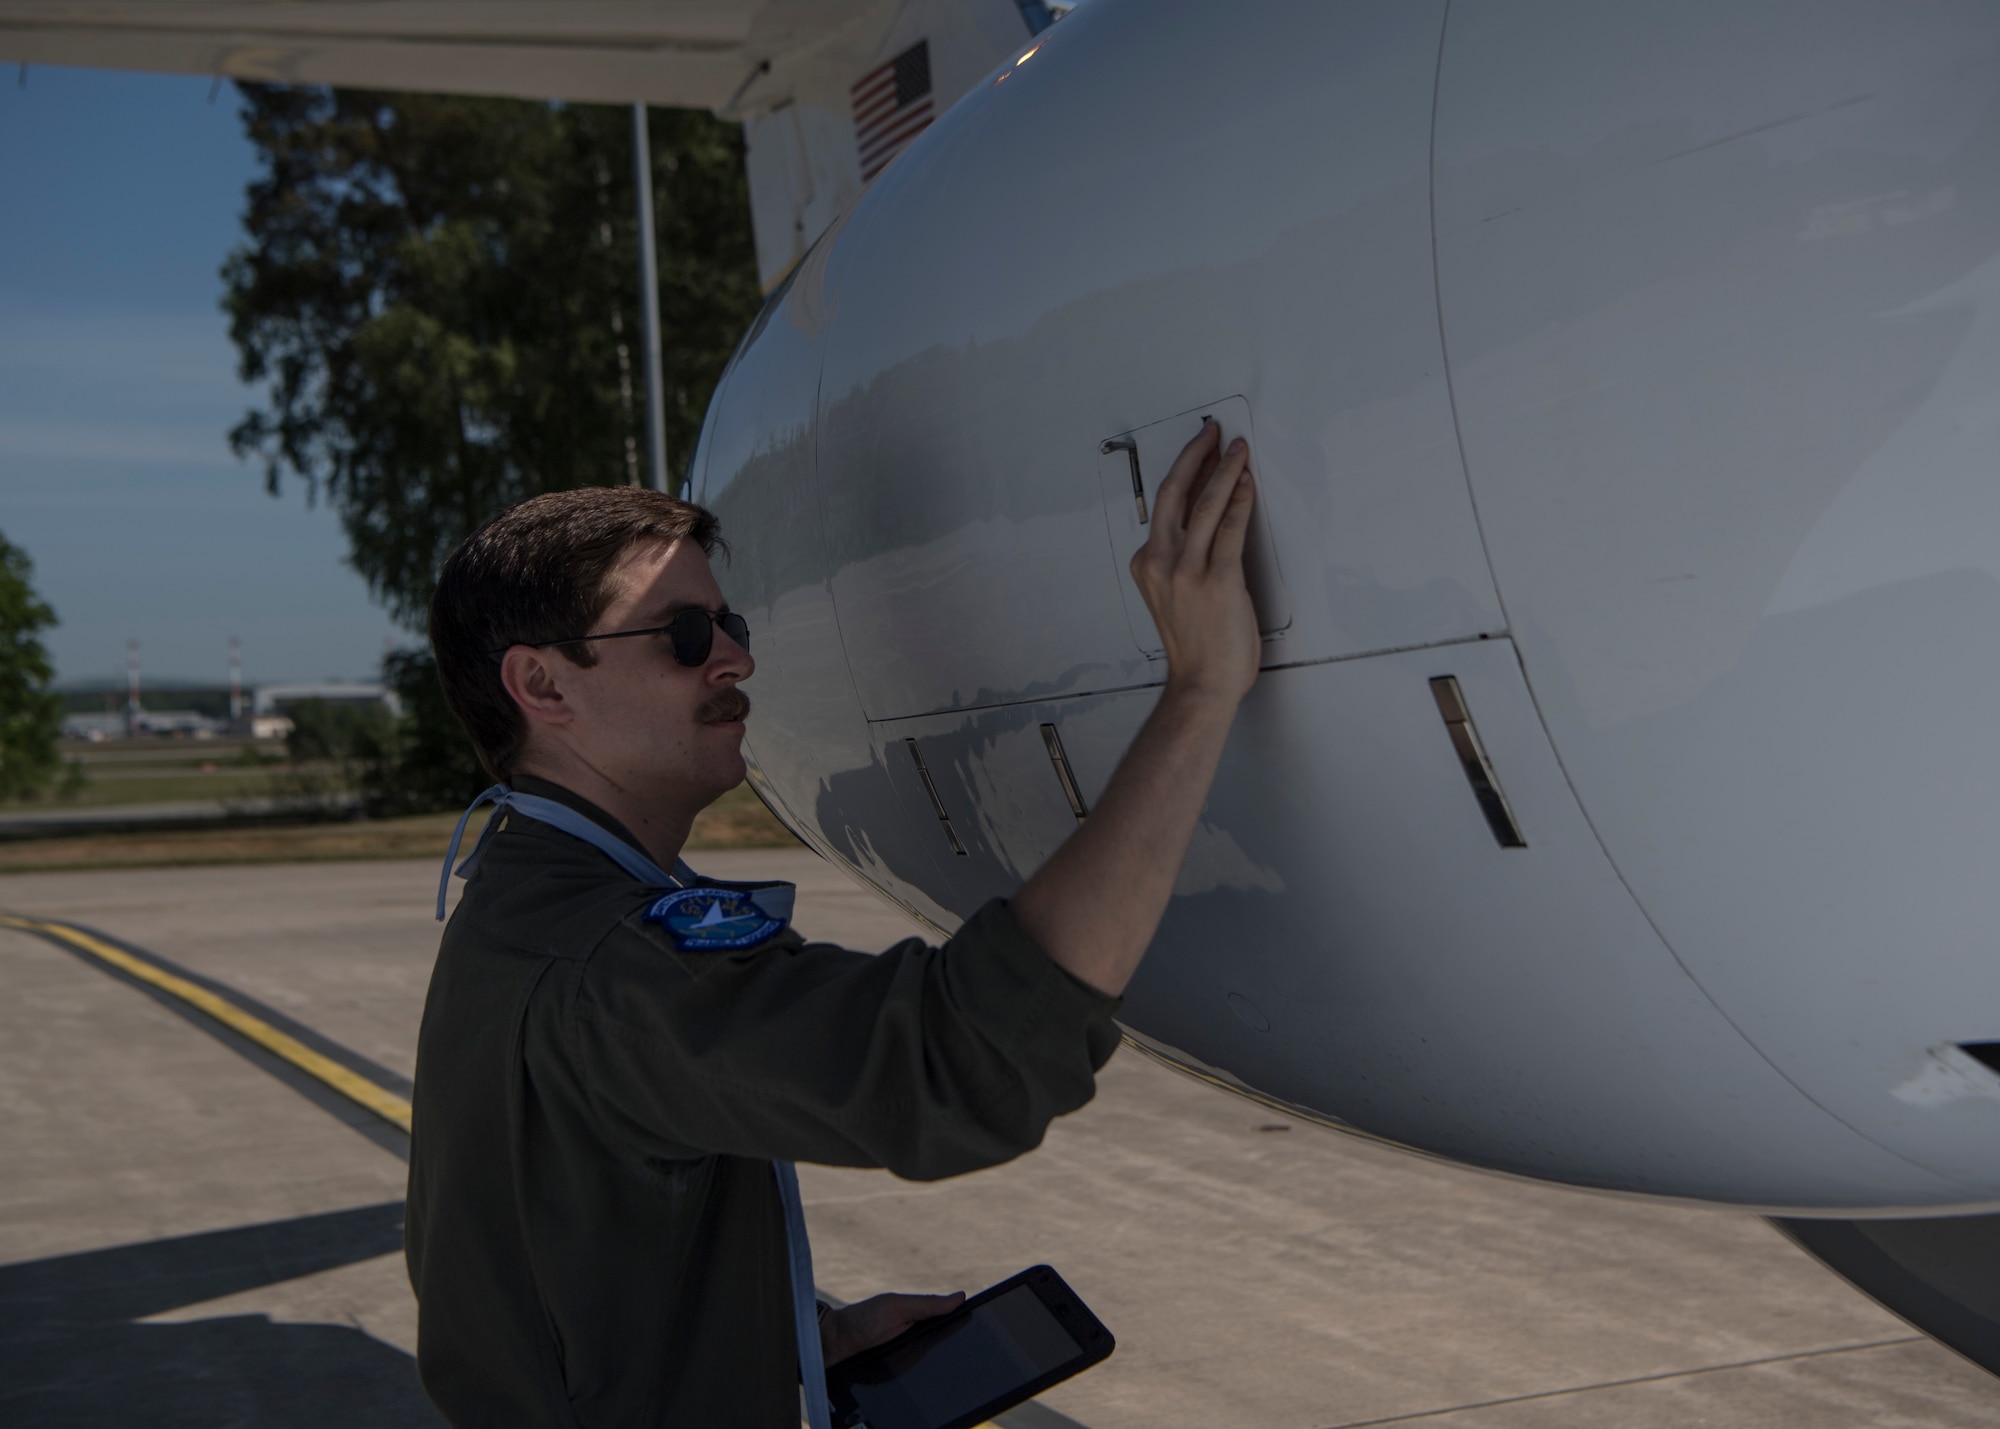 U.S. Air Force 1st Lt. Jacob Goodwin, 76th Airlift Squadron training officer, performs a preflight inspection for a C-21A Learjet, at Ramstein Air Base, Germany, May 8, 2020.